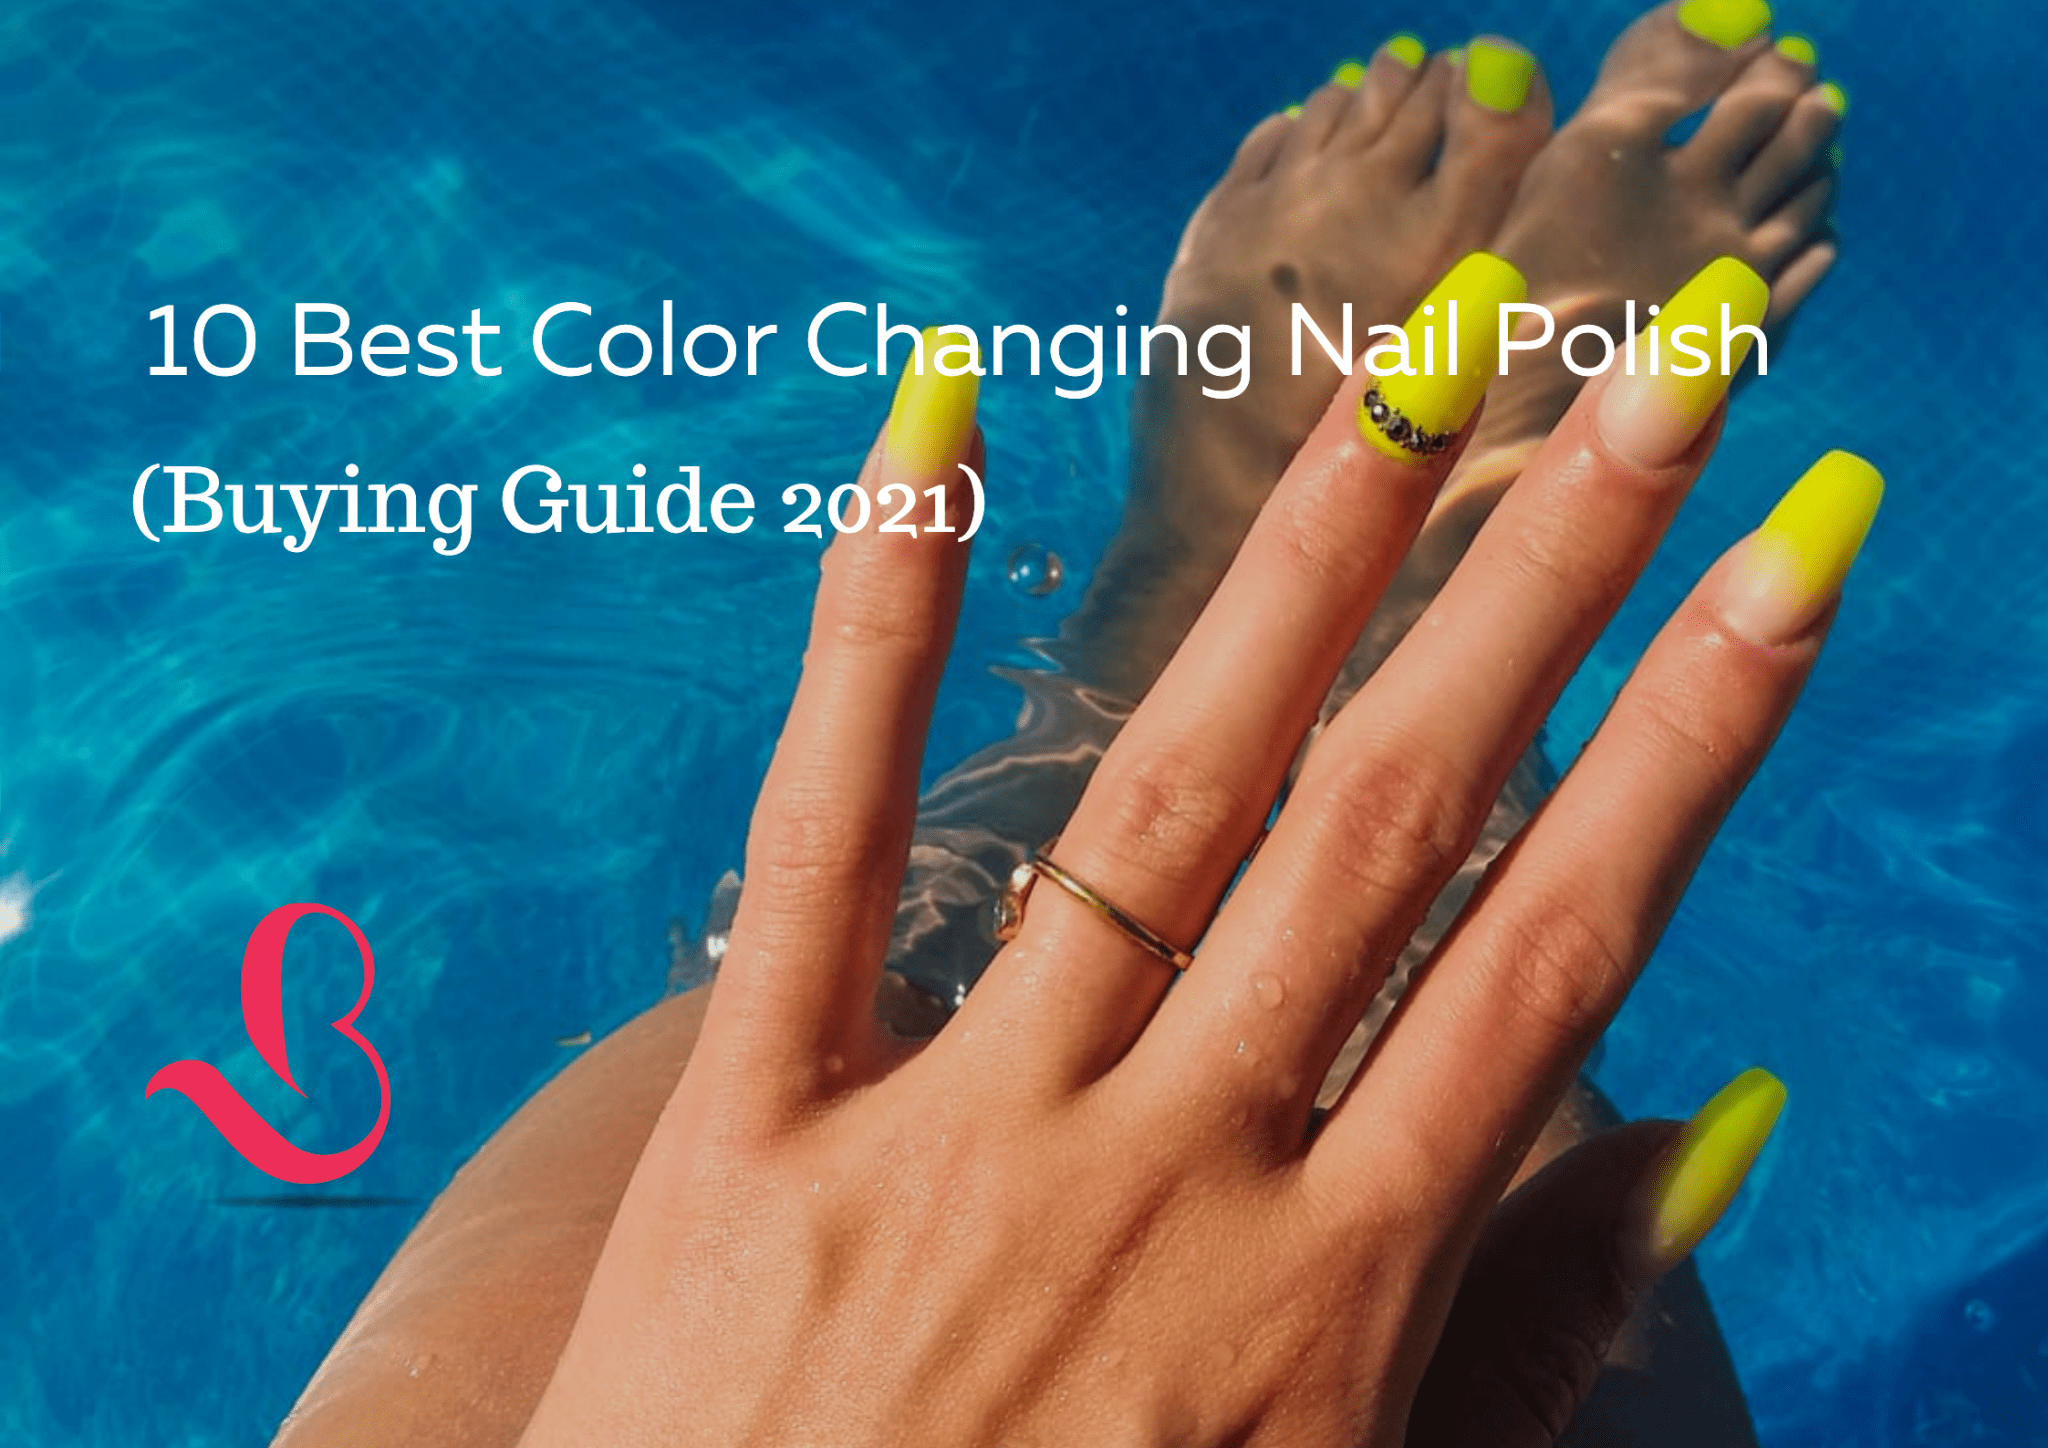 9. Best Color Changing Nail Polish Brands - wide 11